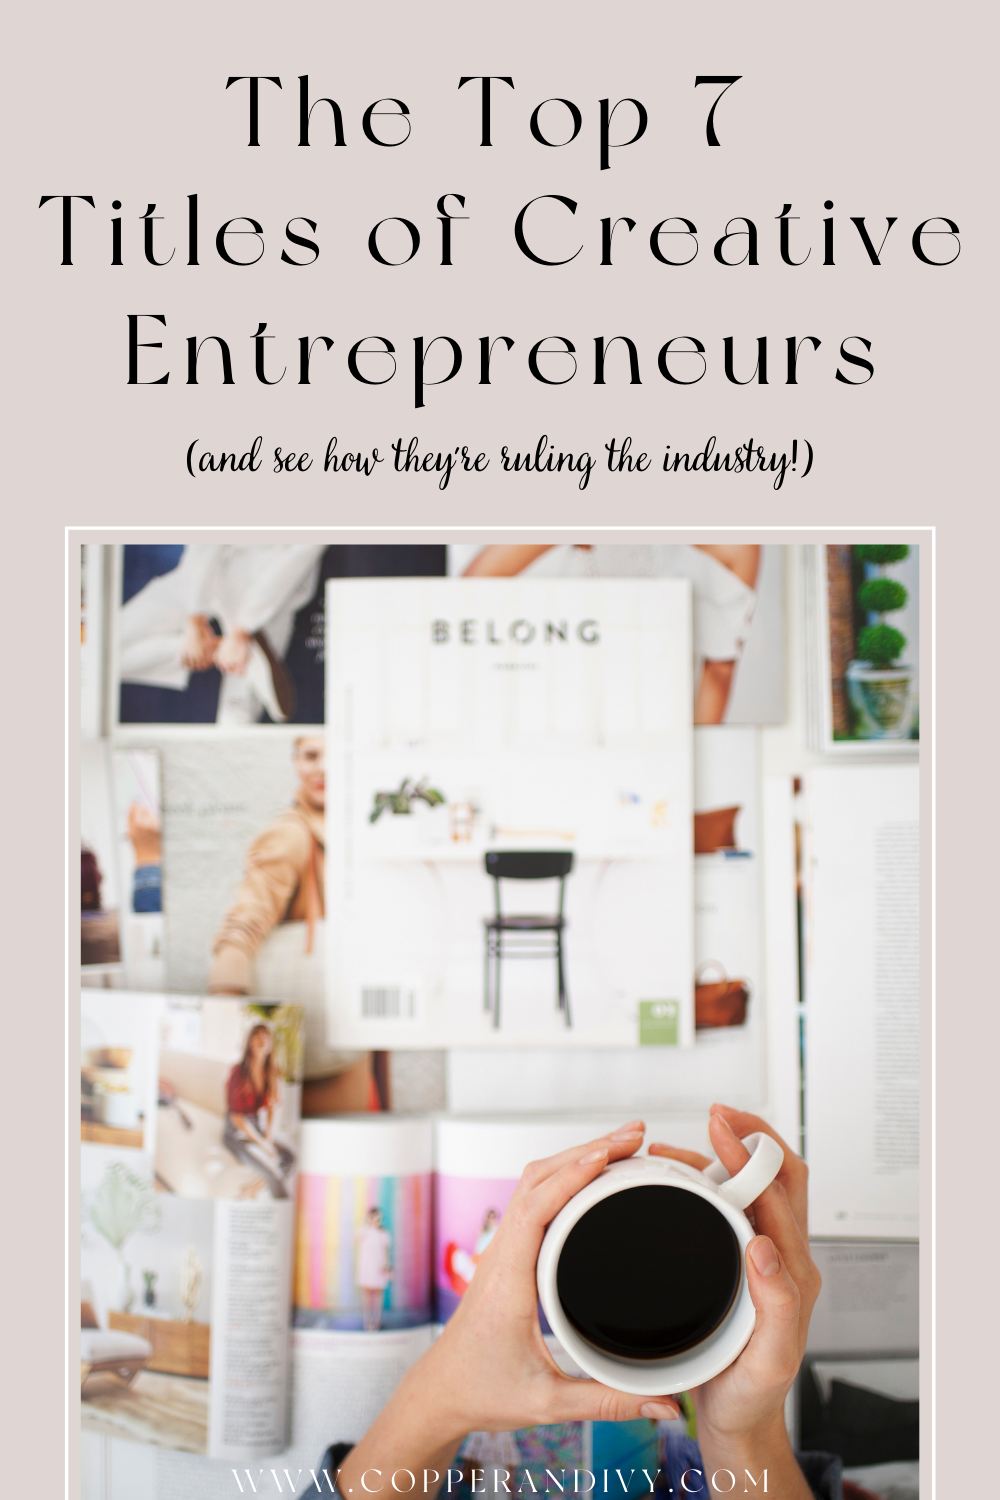 What is a Creative Entrepreneur? - Copper & Ivy Creative